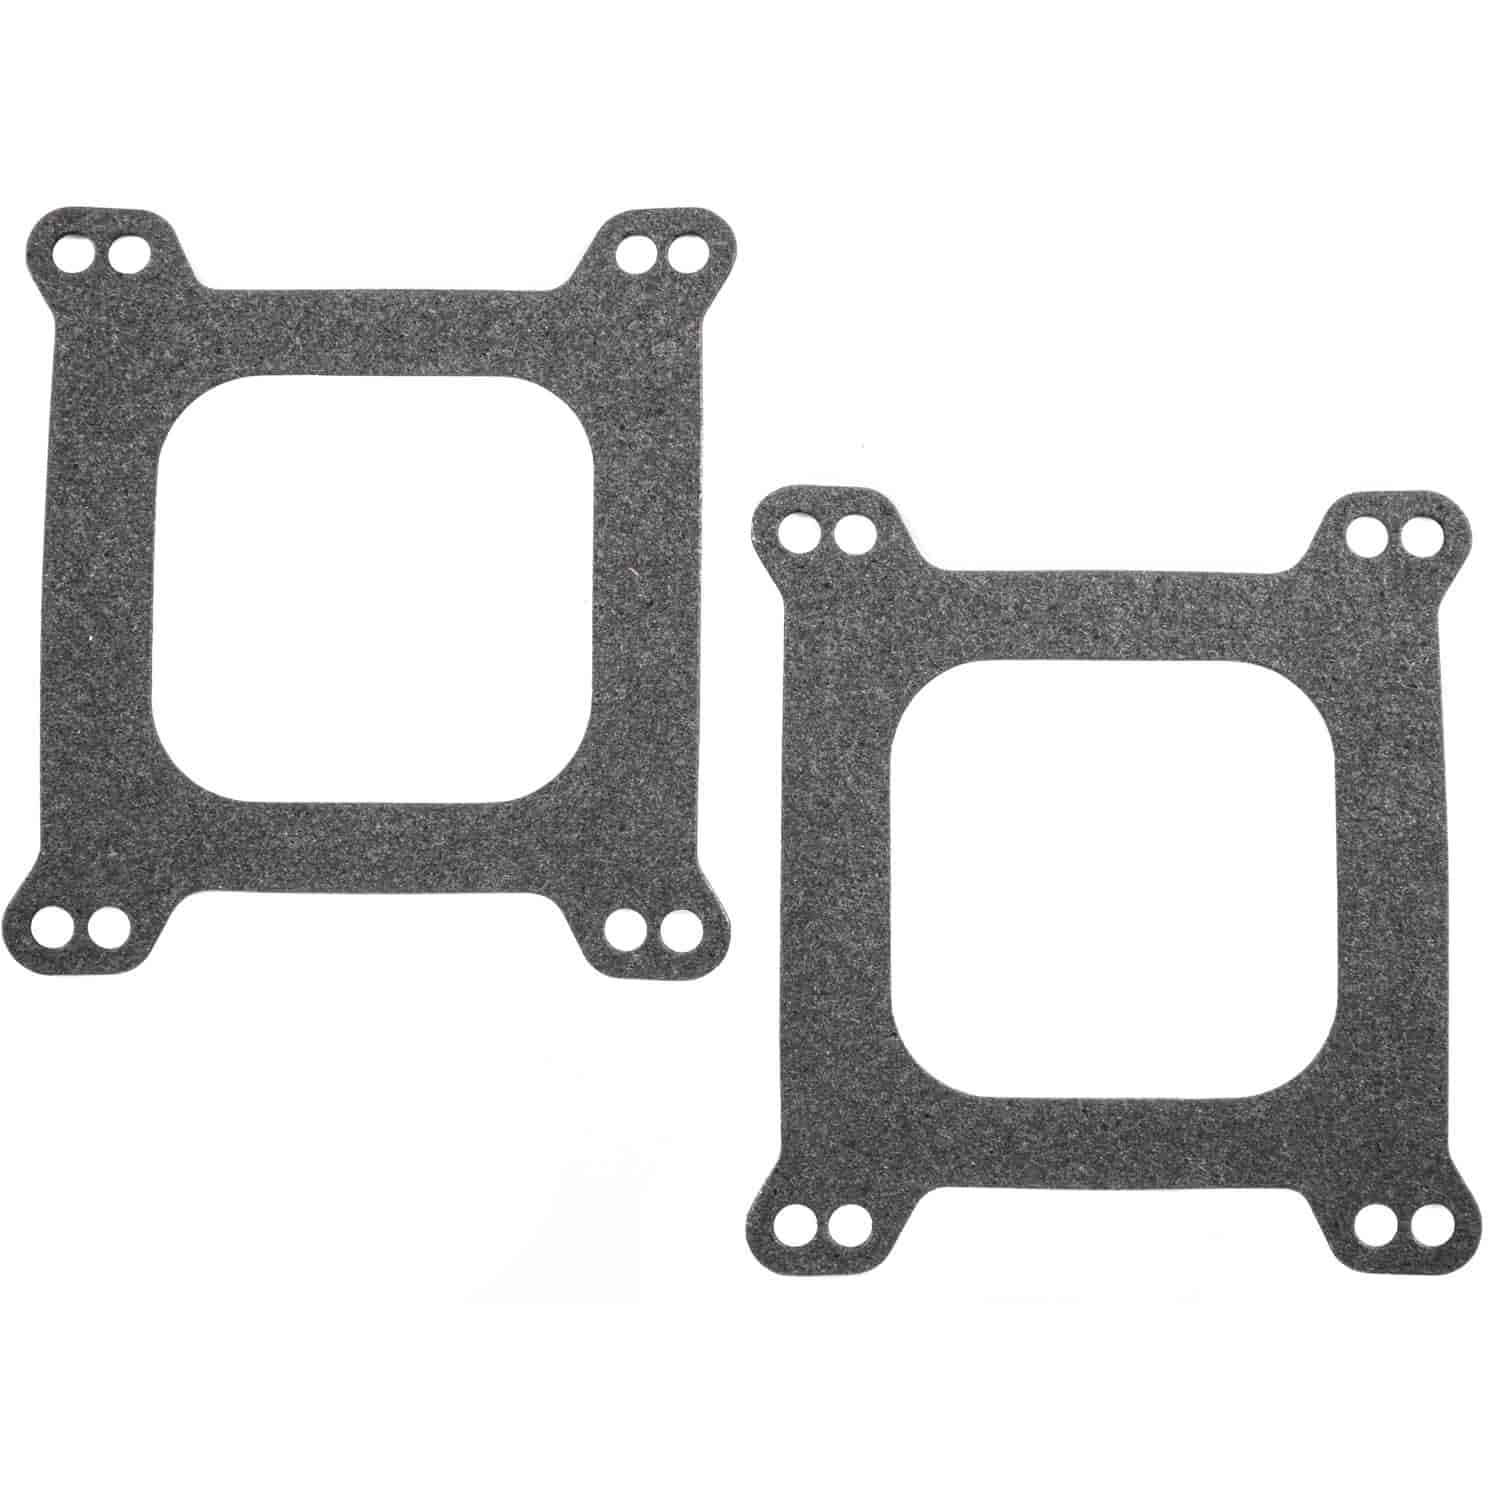 Carburetor Base Gaskets Fits Performer and Thunder Series Carbs